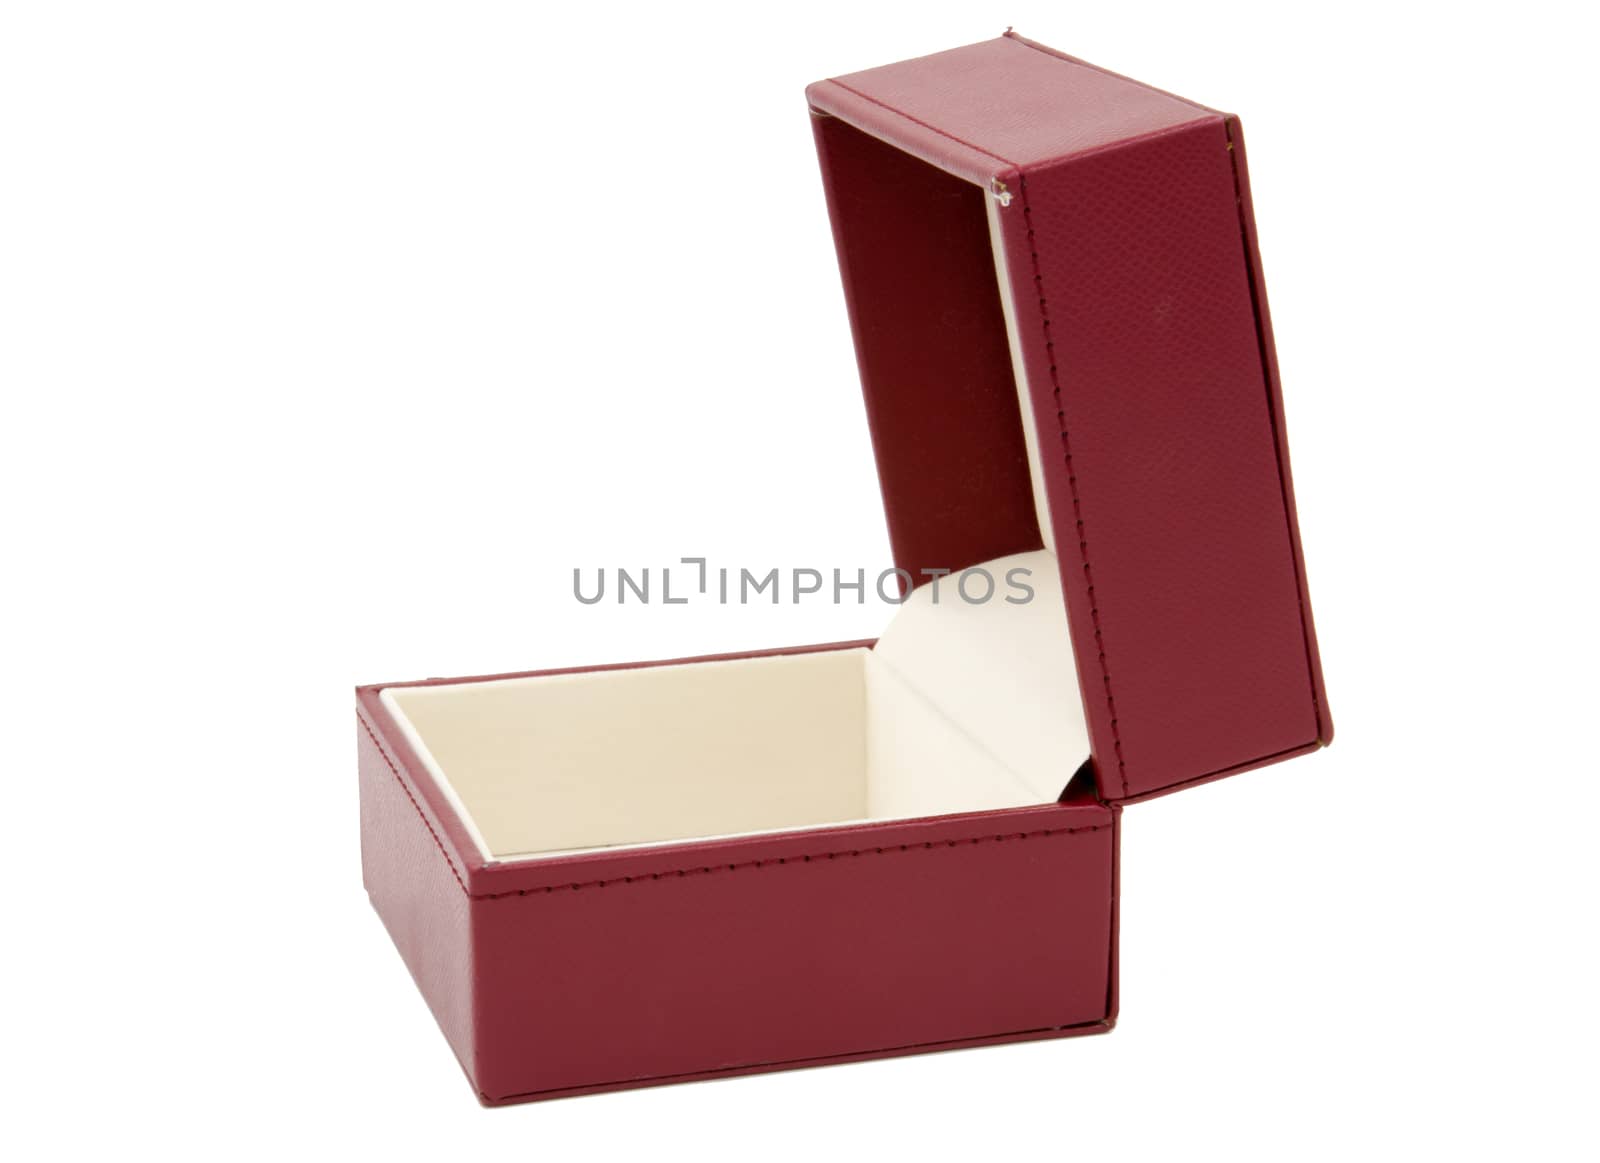 empty red gift box on white background.